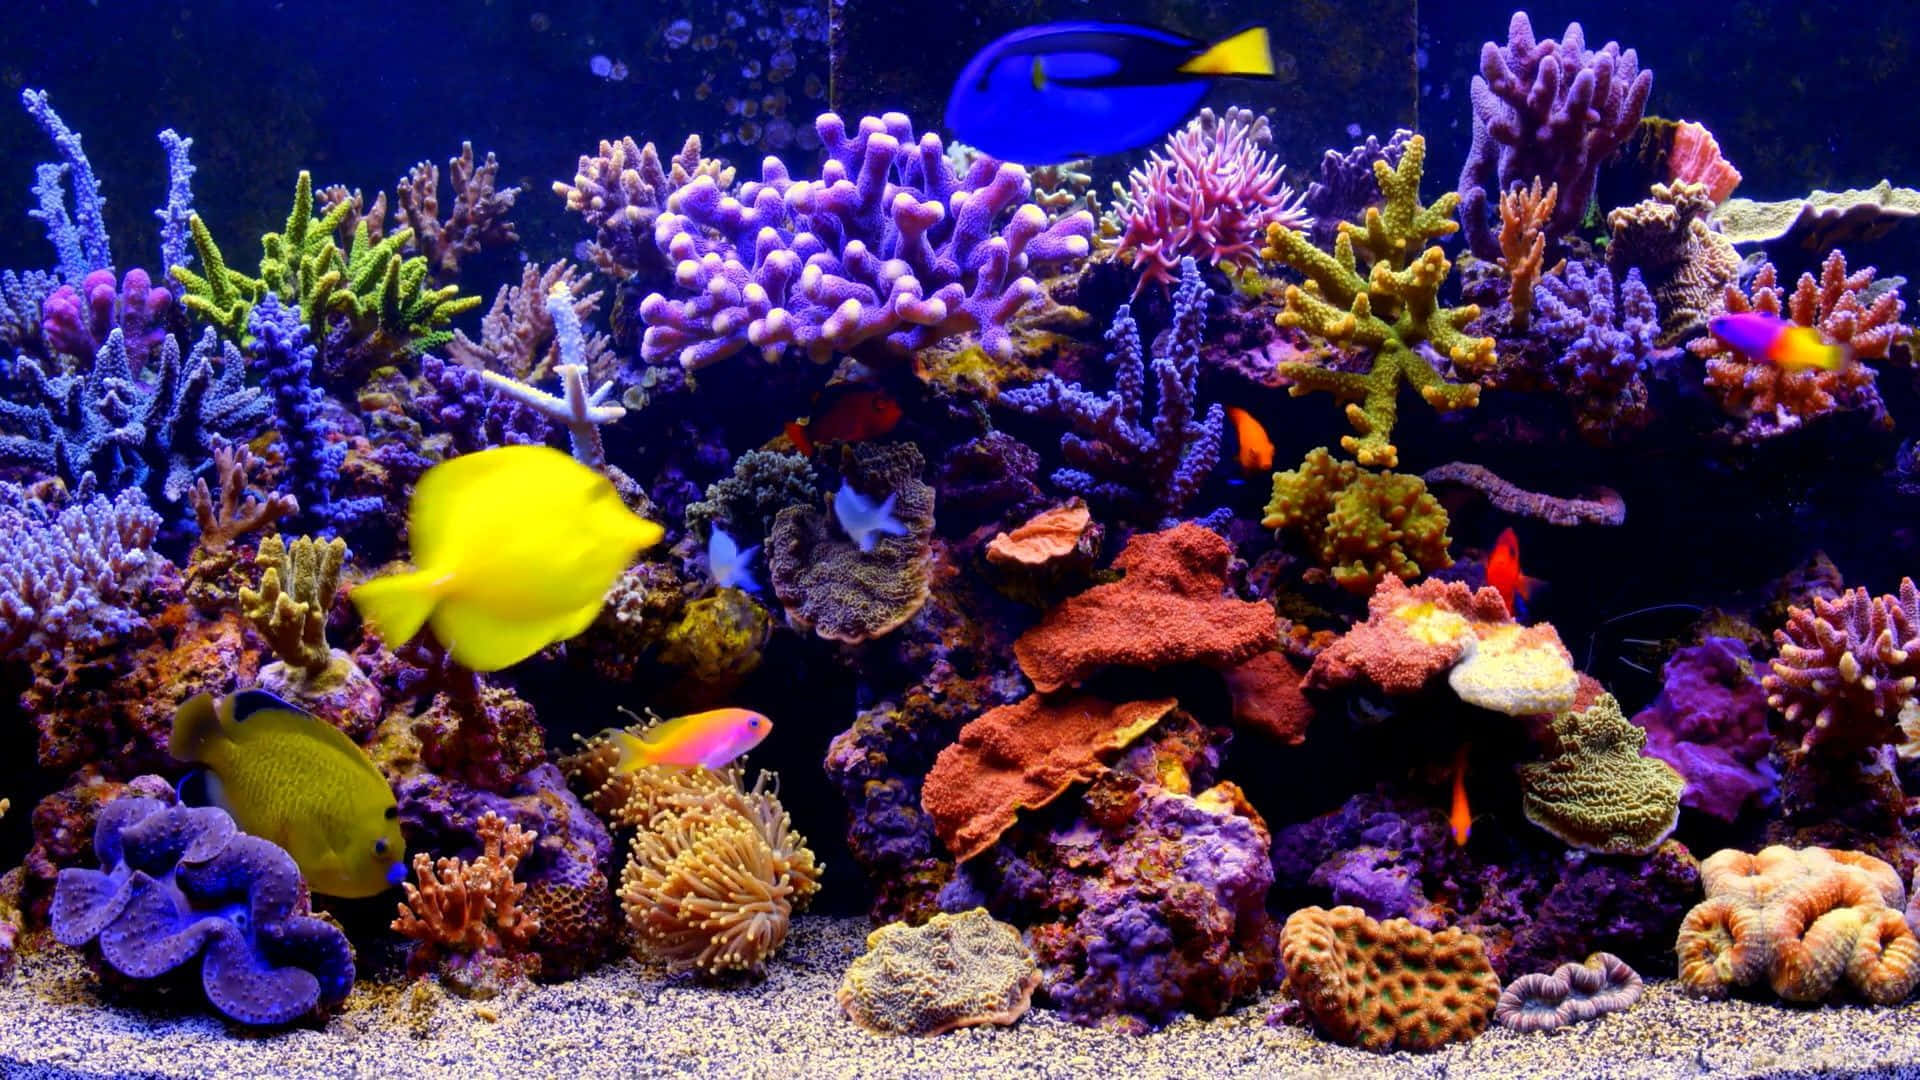 Download Colorful Coral Reefs Fish Tank Background | Wallpapers.com